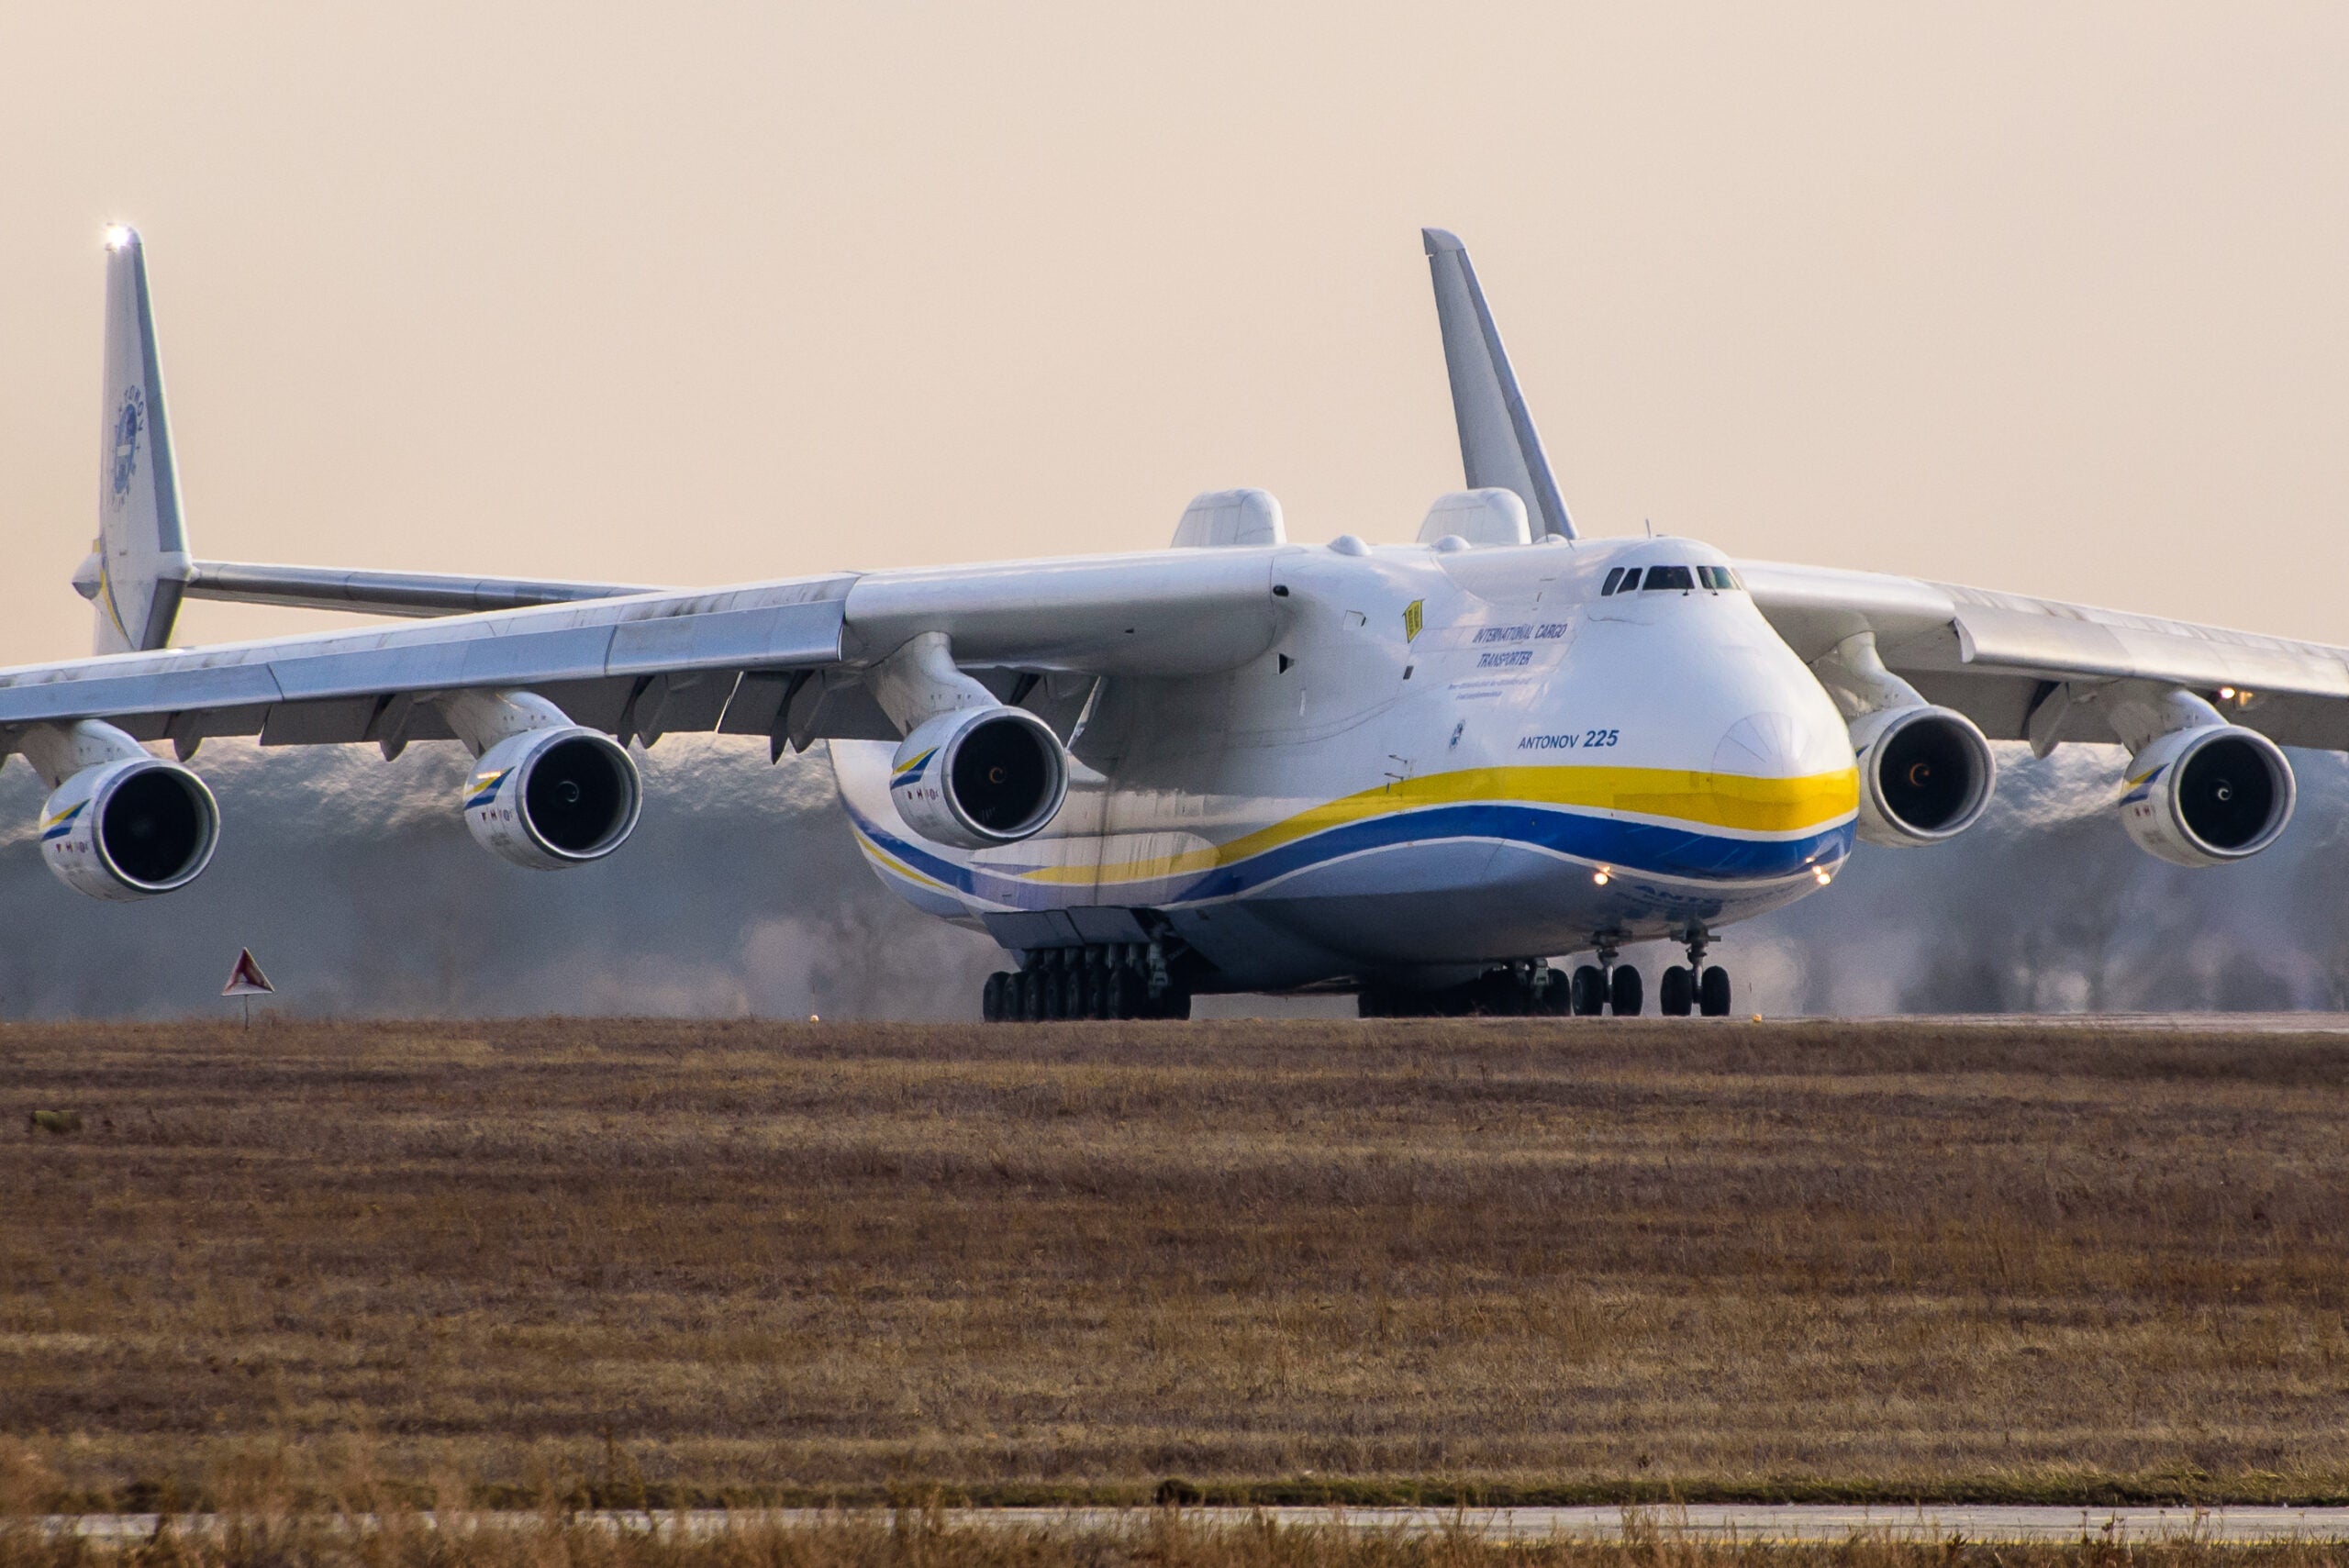 Report: Antonov Official Fired after Destruction of World’s Largest Cargo Airplane